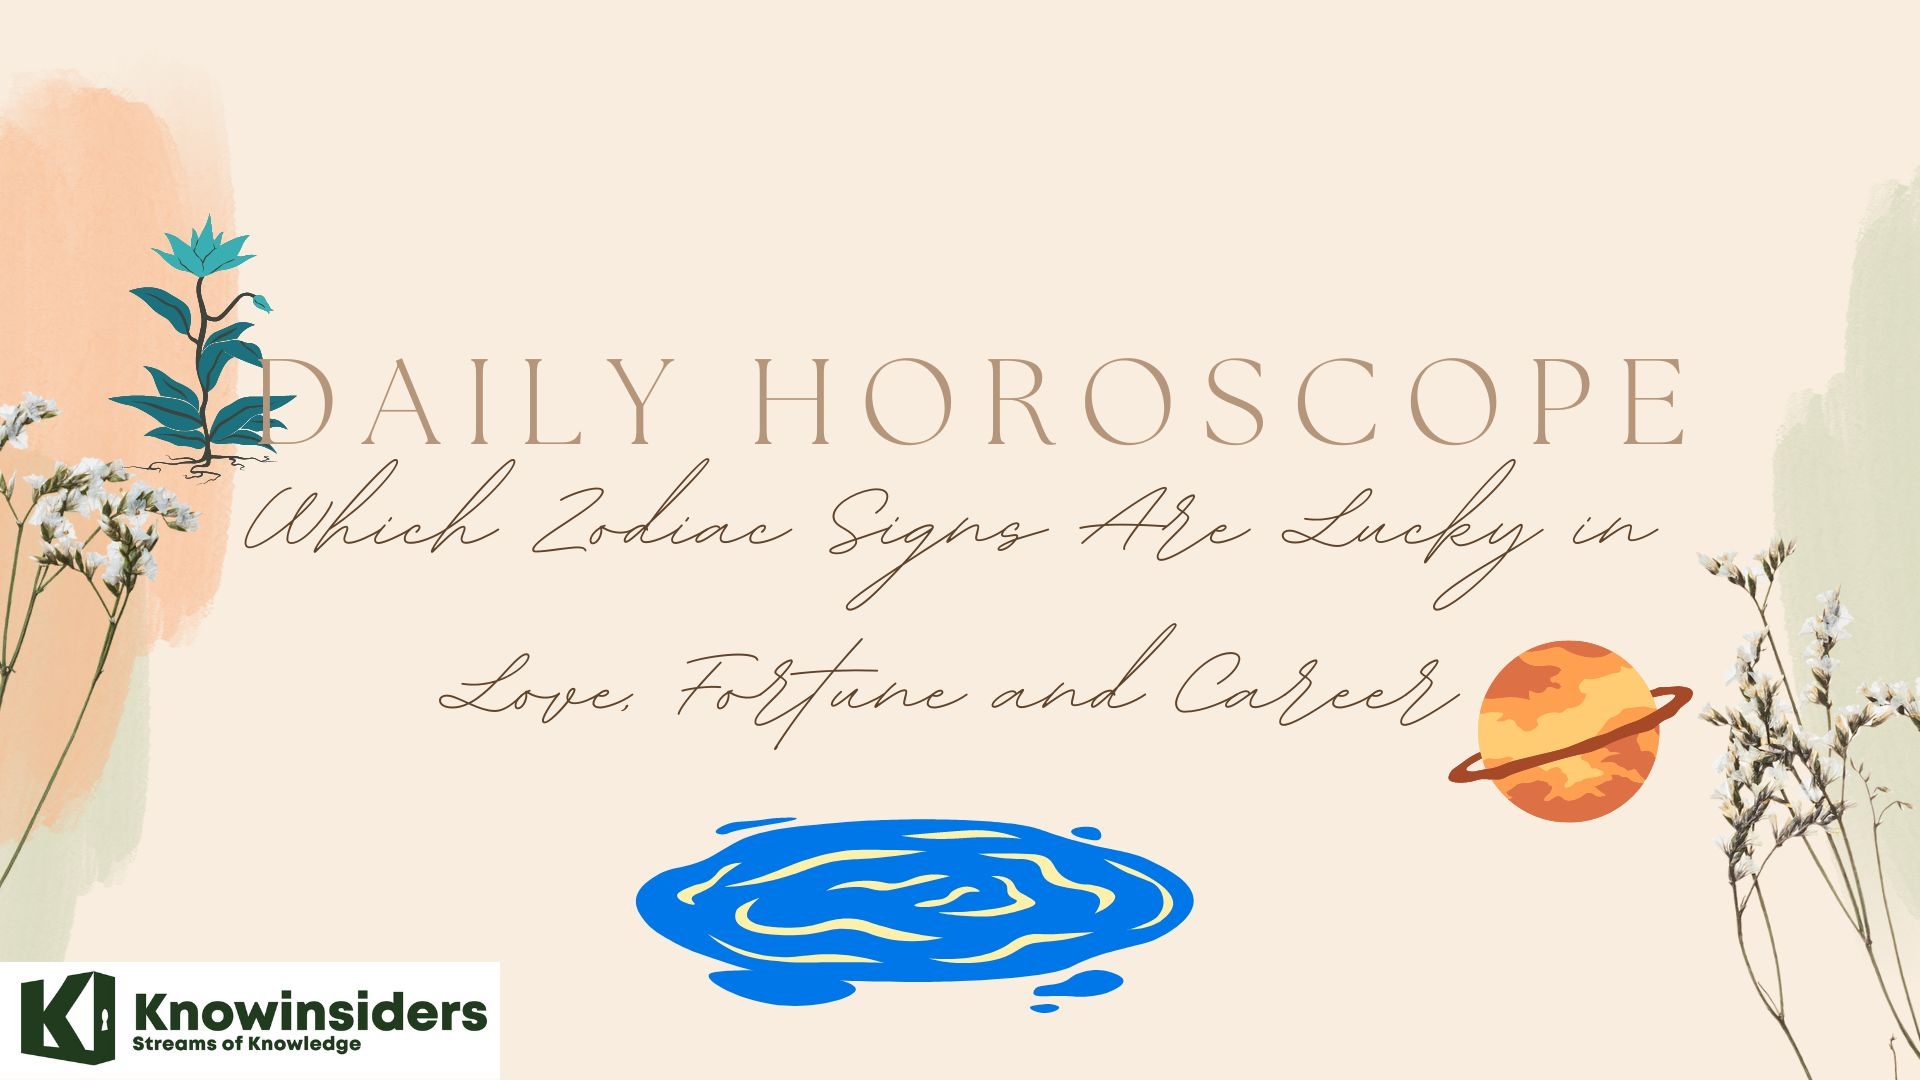 Daily Horoscope (June 22, 2022): Which Zodiac Signs Are Lucky in Love, Fortune and Career